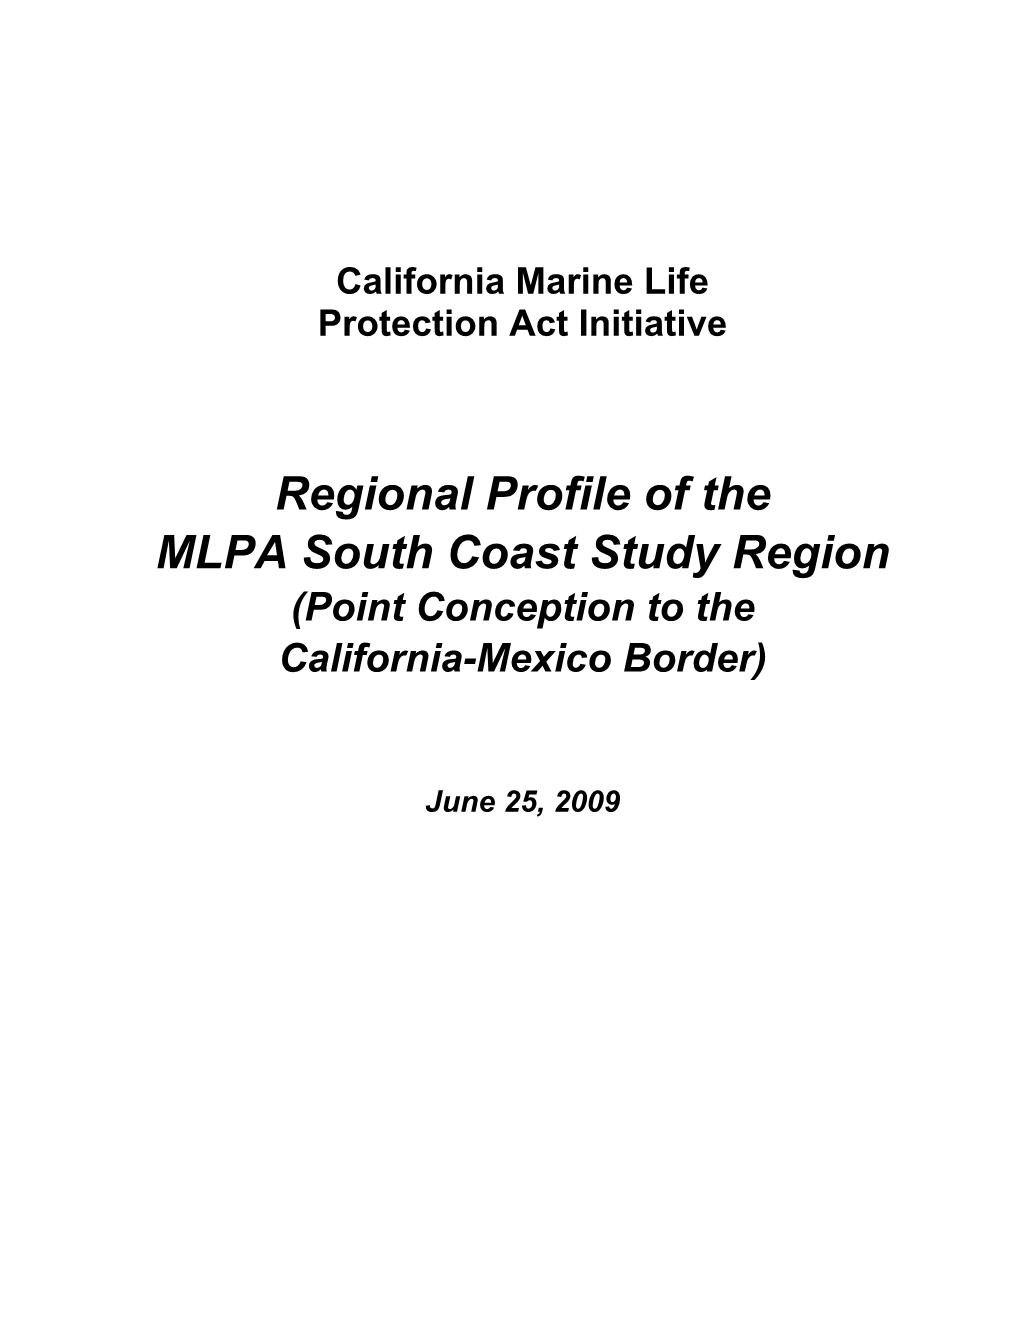 Regional Profile of the MLPA South Coast Study Region (Point Conception to the California-Mexico Border)